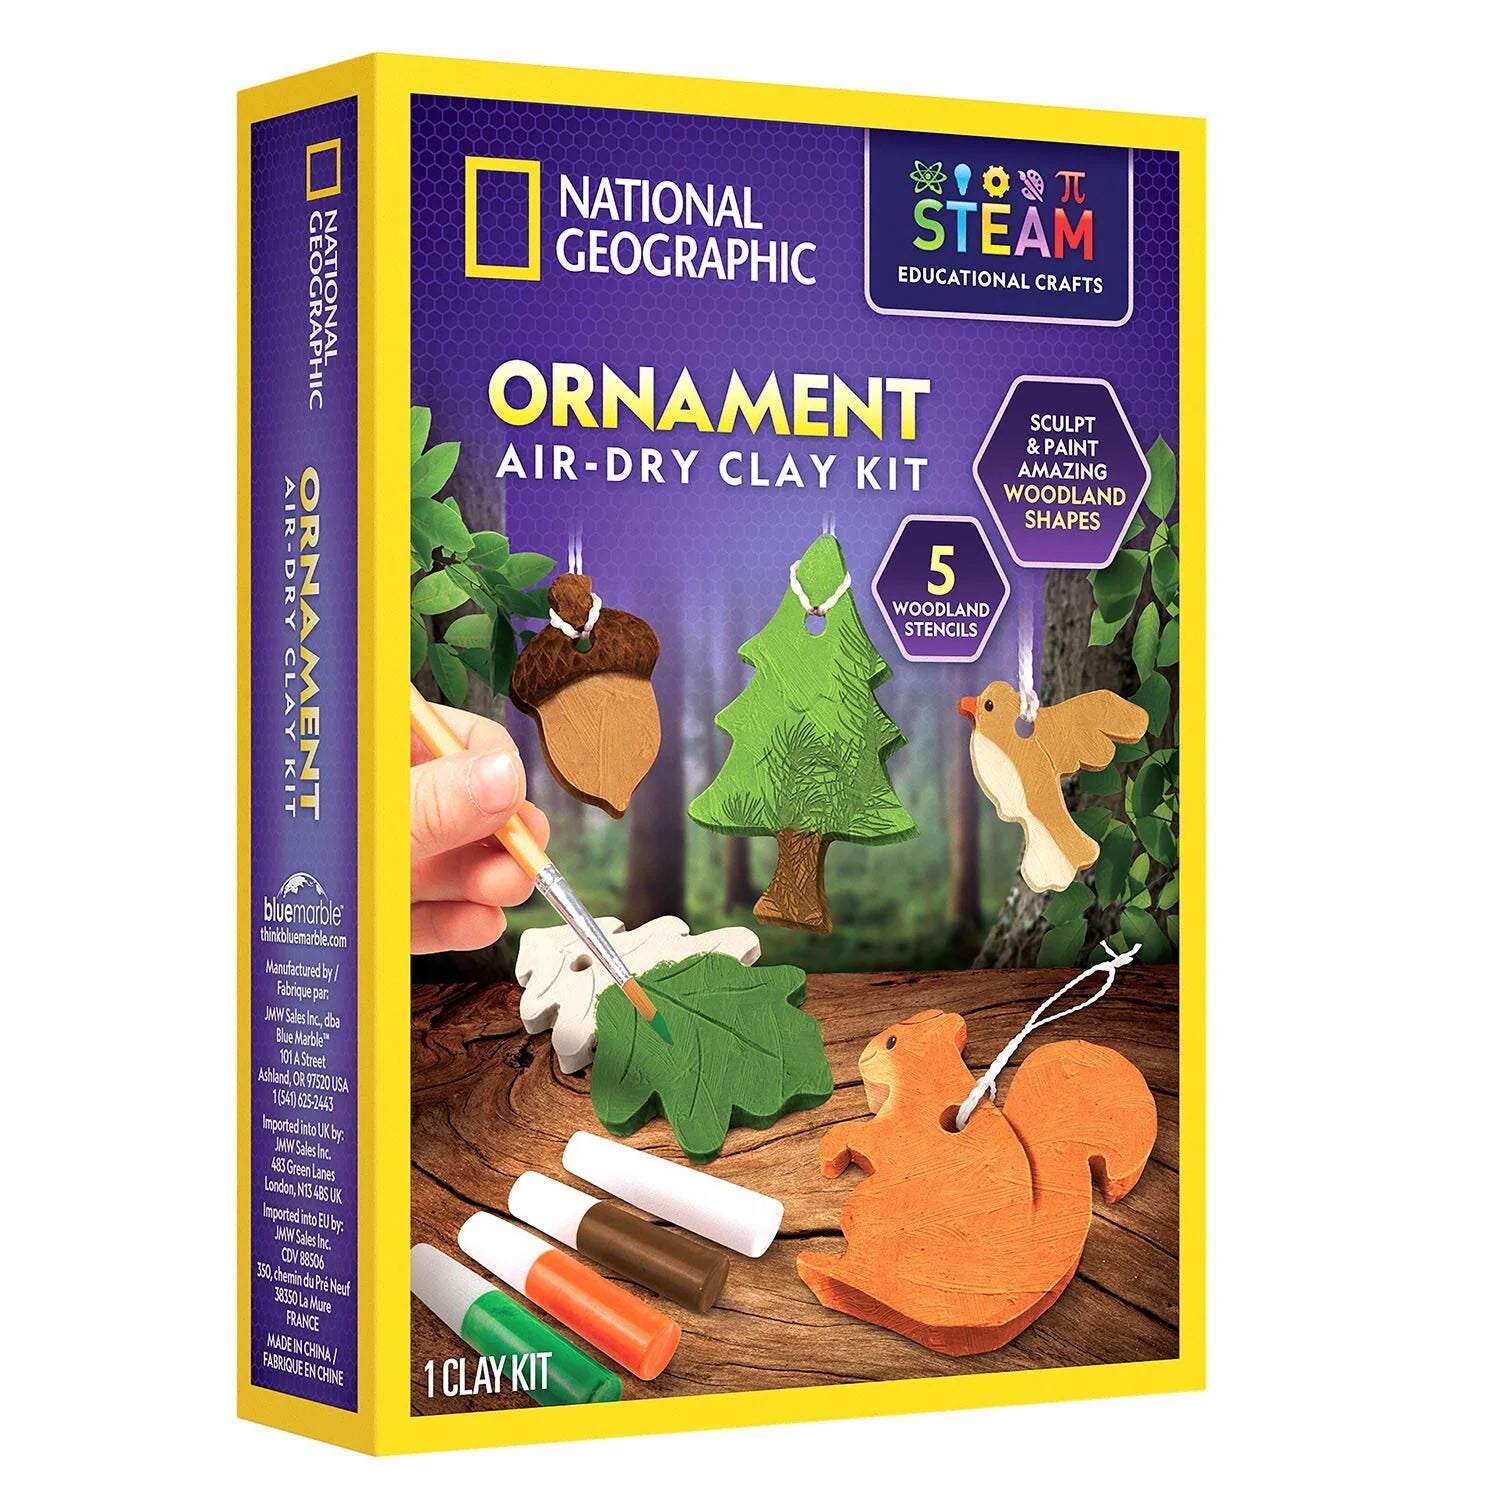 National Geographic Ornament Air-Dry Clay Kit